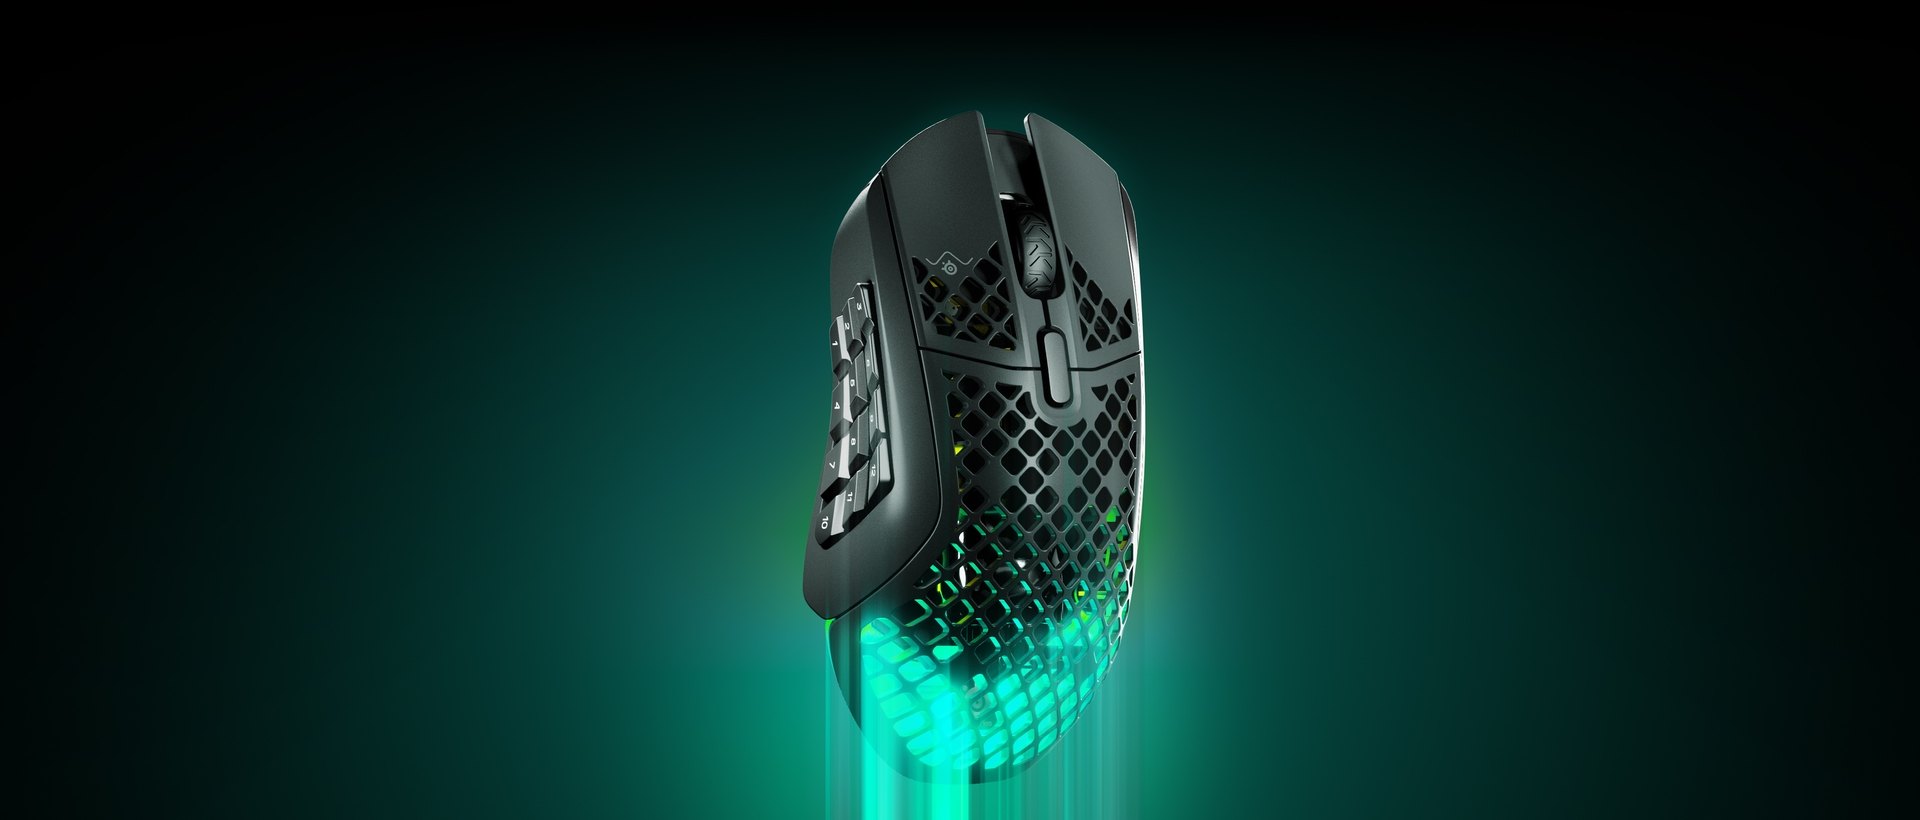 An Aerox 9 Wireless mouse with light beaming from the body.